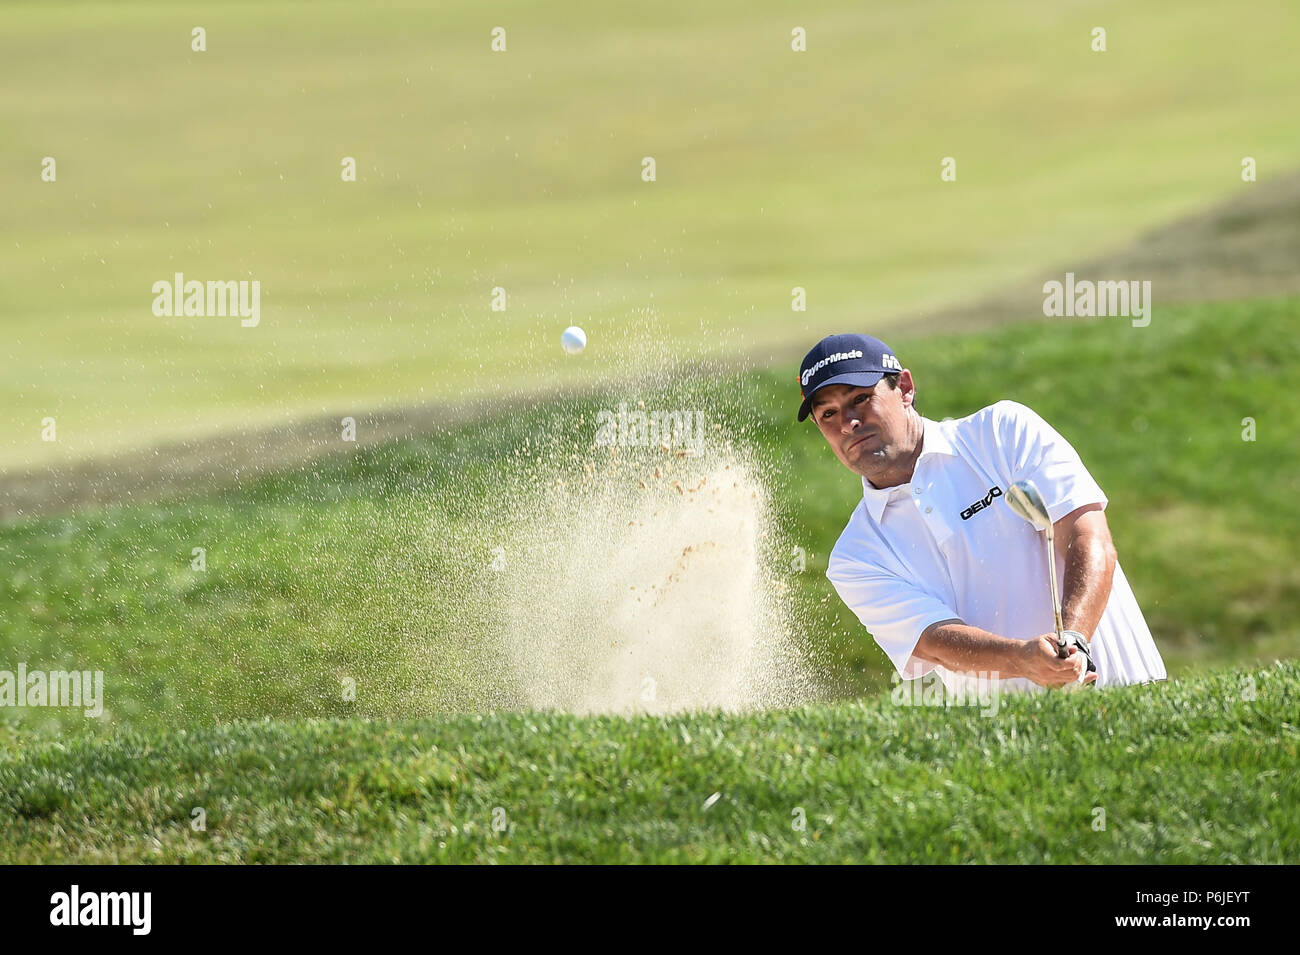 JUNE 30, 2018 - Johnson Wagner (USA) hits out of the green side bunker on hole fourteen during the third round at the 2018 Quicken Loans National at the Tournament Players Club in Potomac MD. Stock Photo